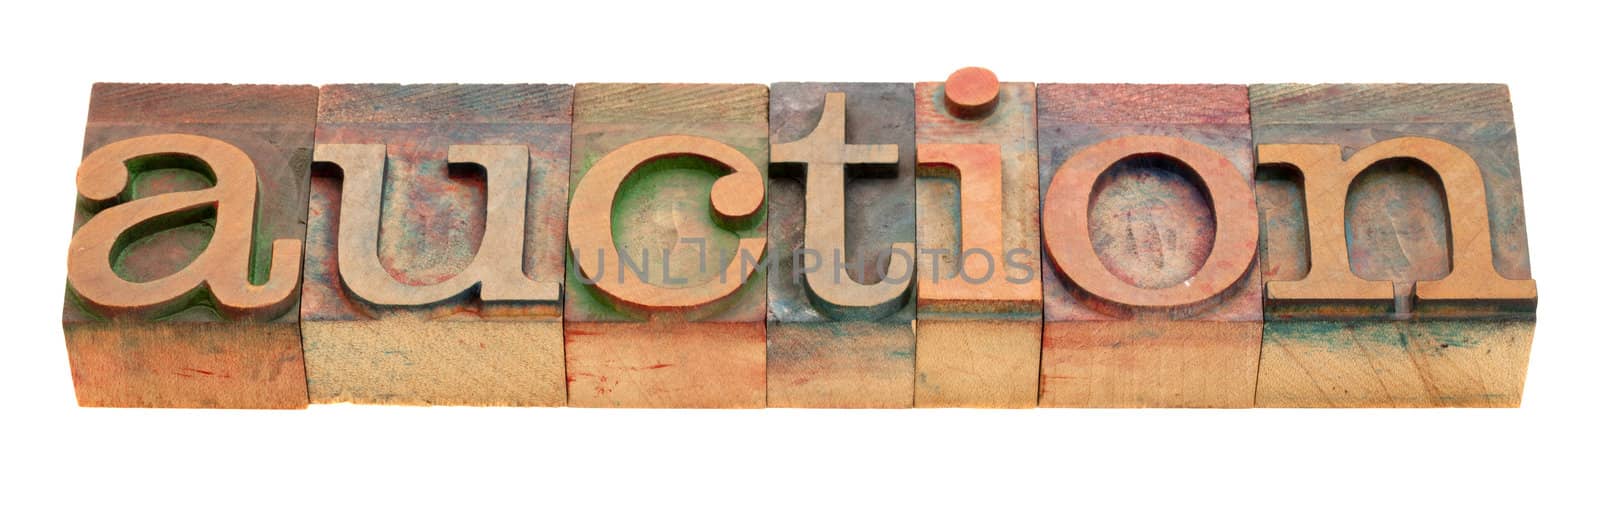 auction - word in vintage wooden letterpress printing blocks isolated on white